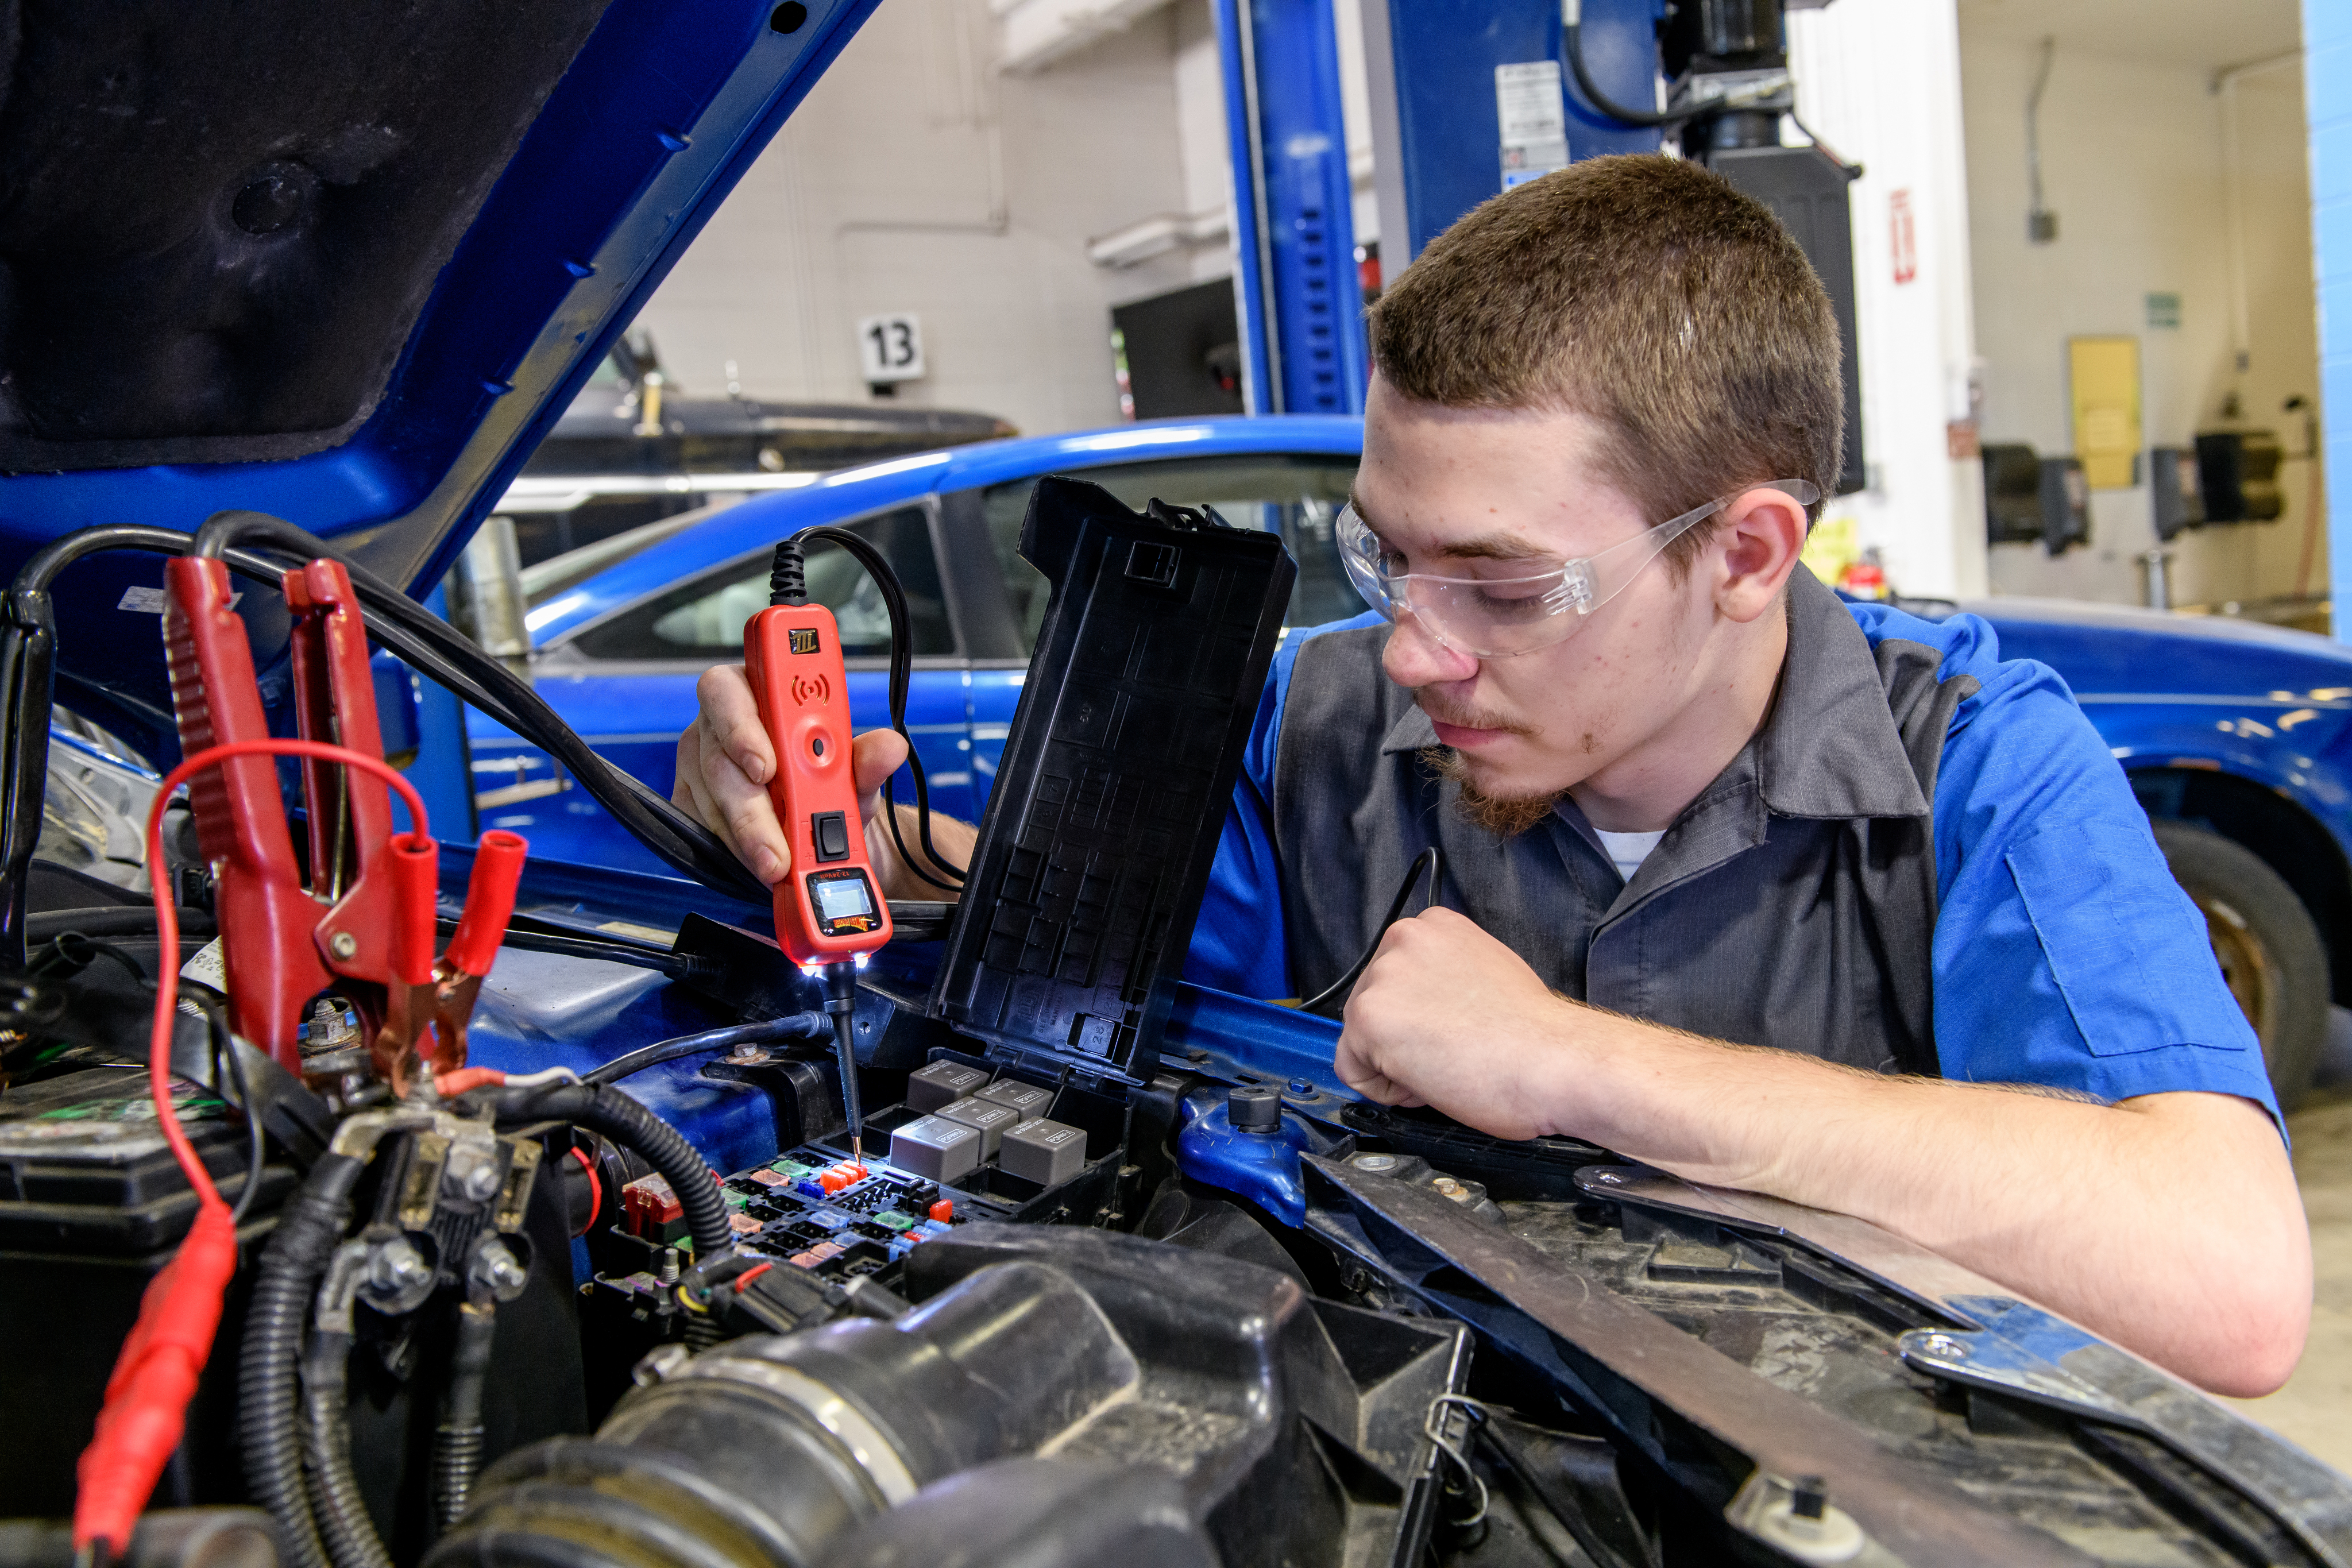 Automotive Technology student uses a tool to measure a car battery under the hood of a car.